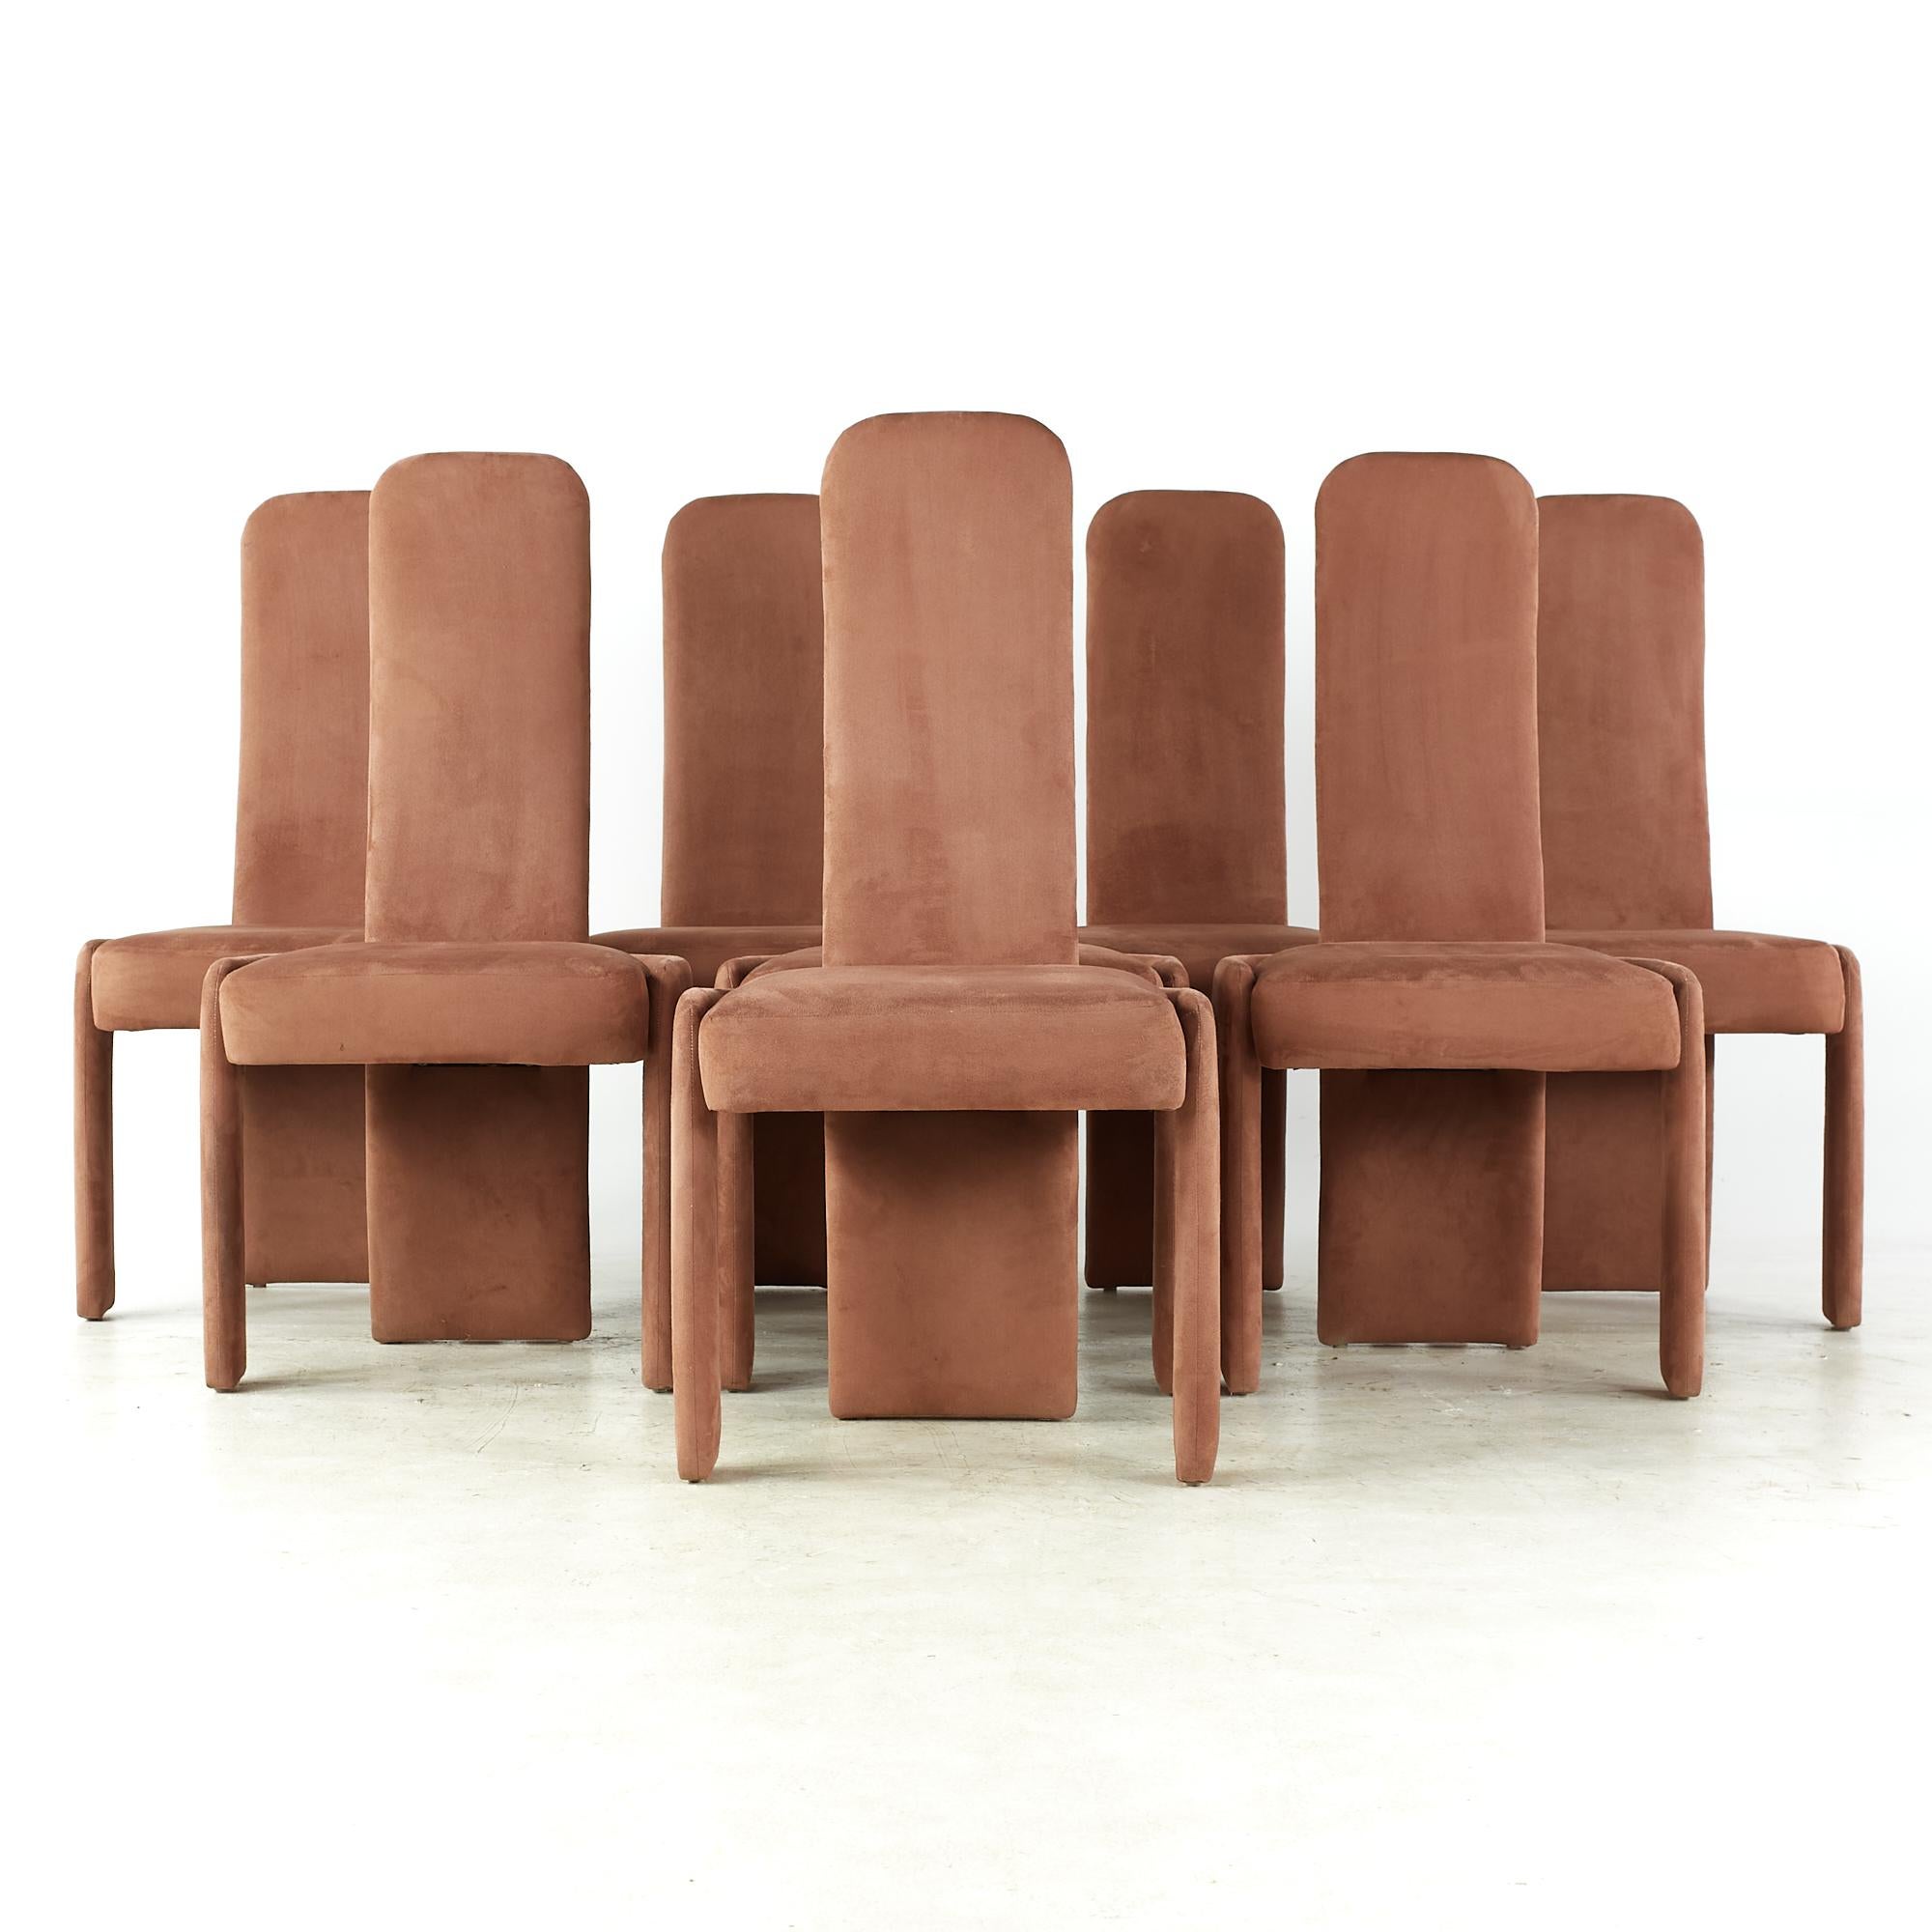 Pierre Cardin midcentury dining chairs - set of 8.

Each chair measures: 21.25 wide x 22 deep x 43 inches high, with a seat height/chair clearance of 19.25 inches

All pieces of furniture can be had in what we call restored vintage condition.